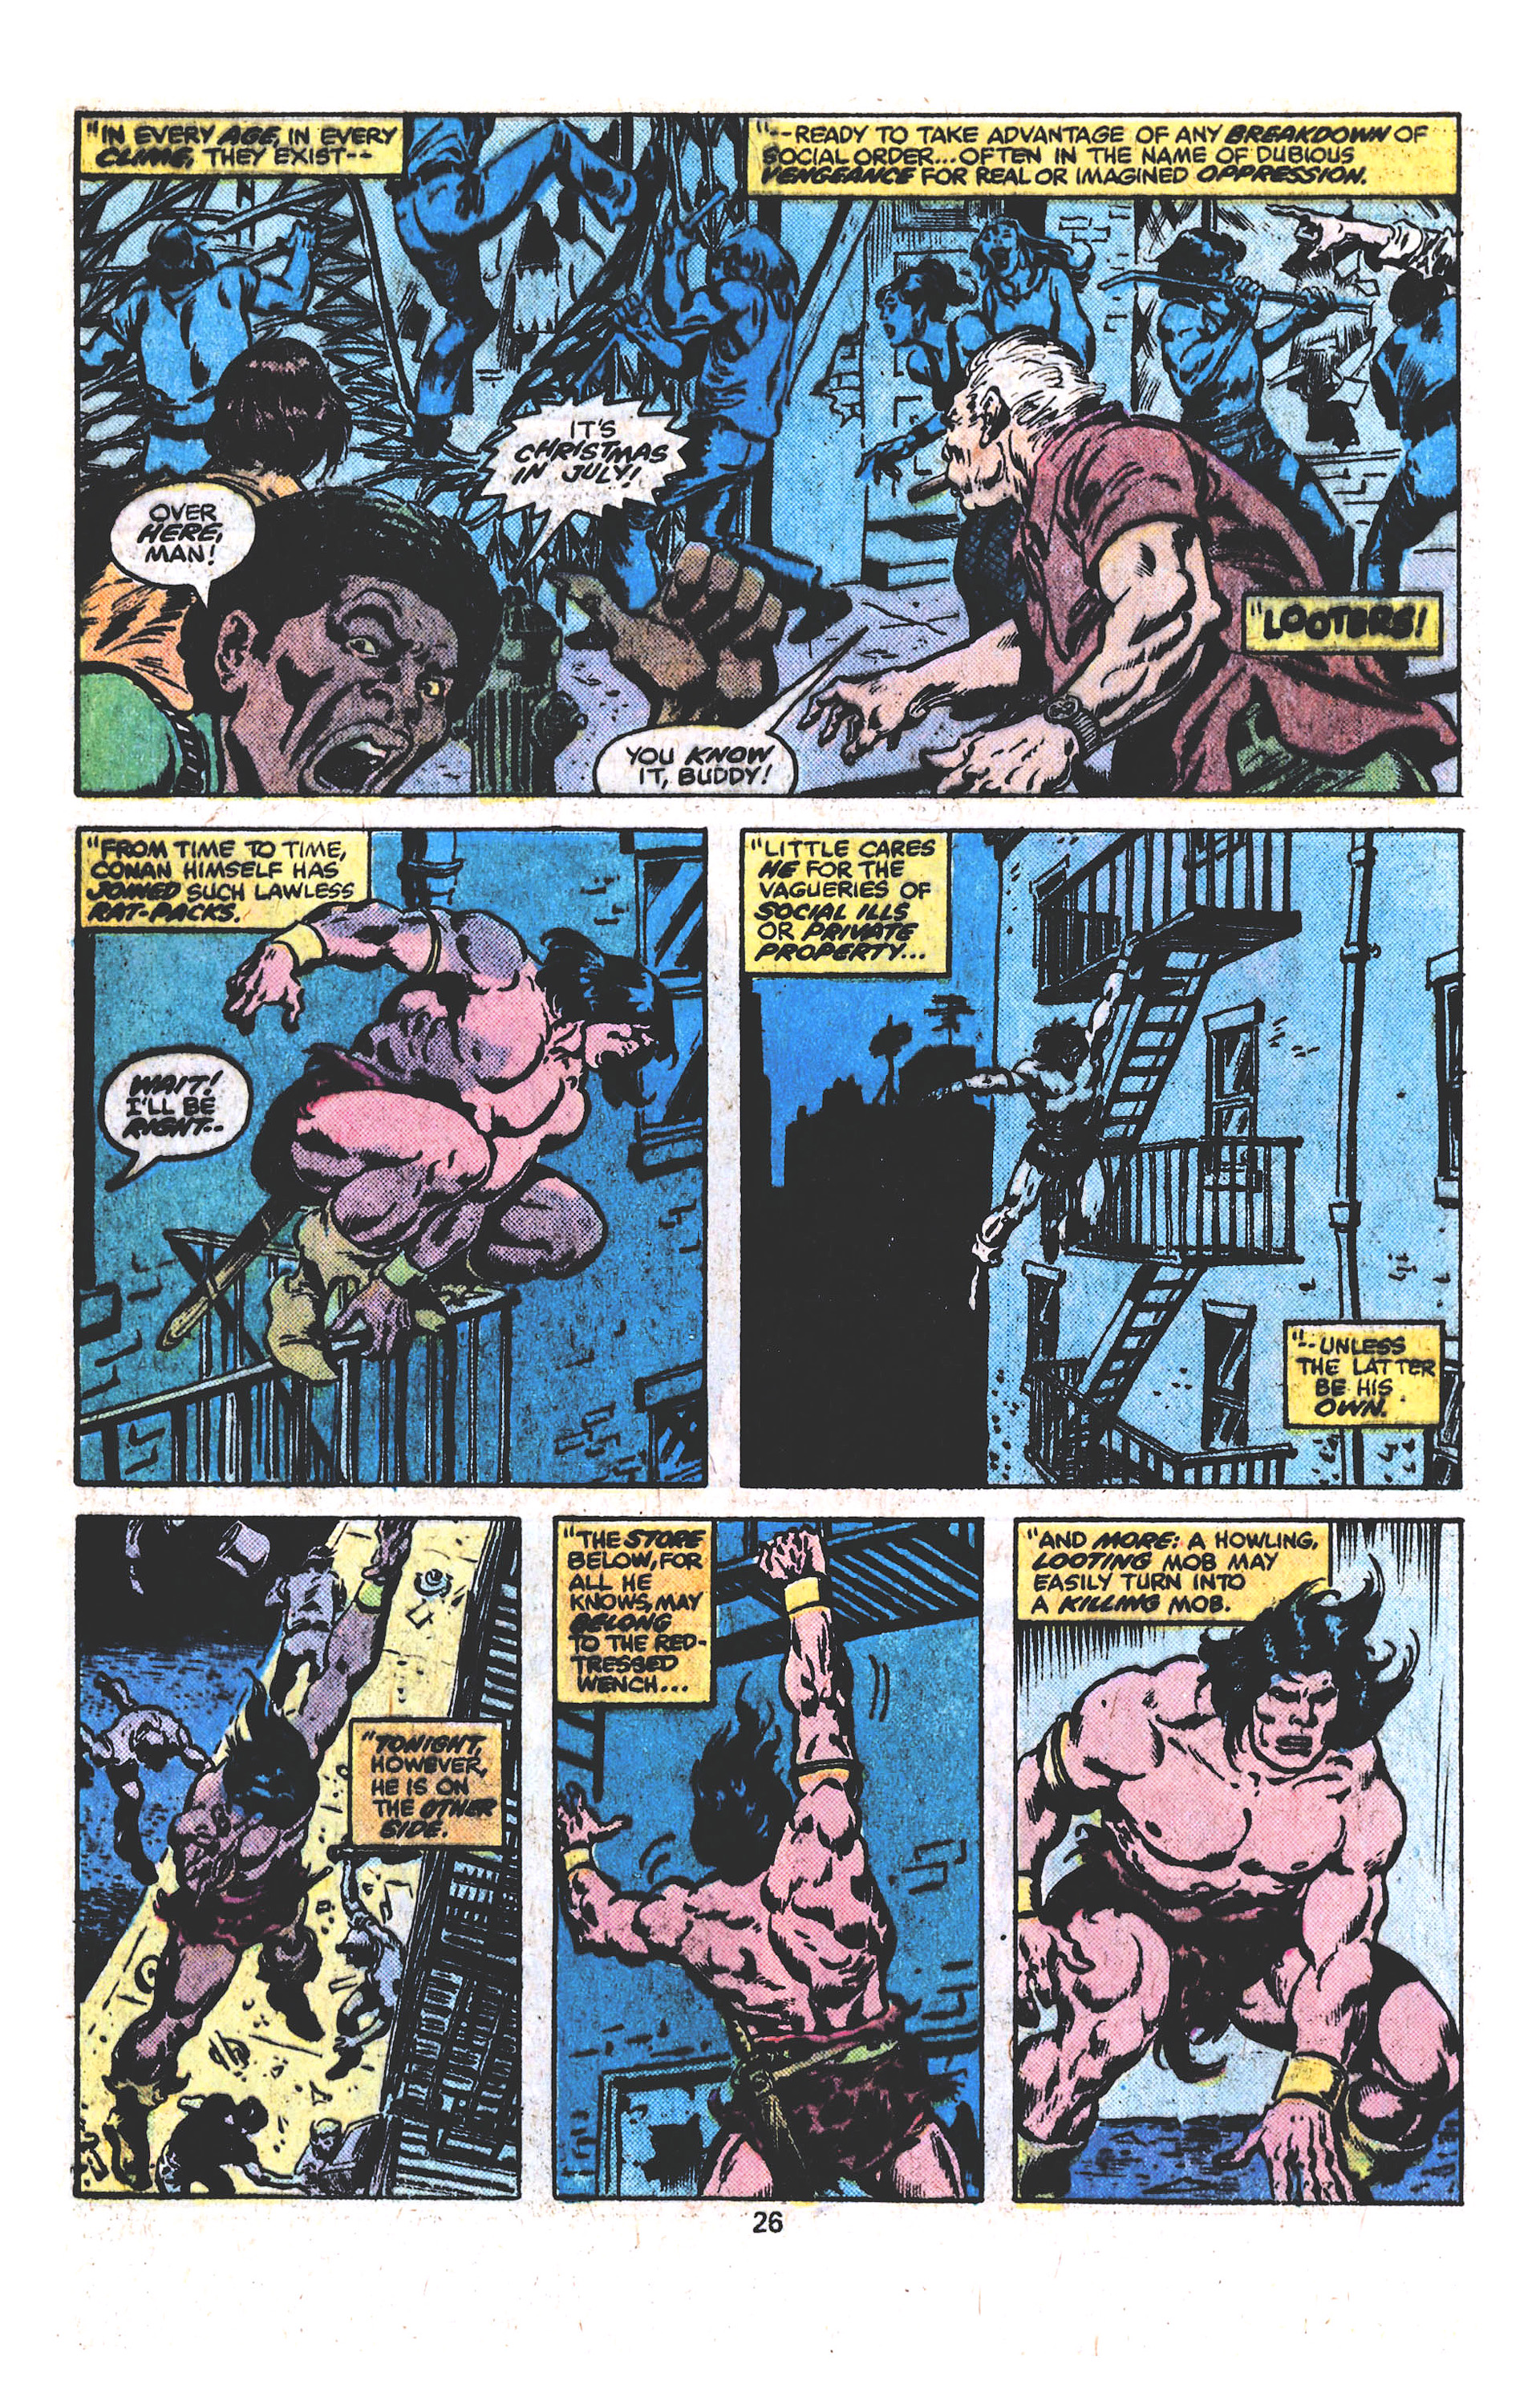 What If? (1977) Issue #13 - Conan The Barbarian walked the Earth Today #13 - English 21